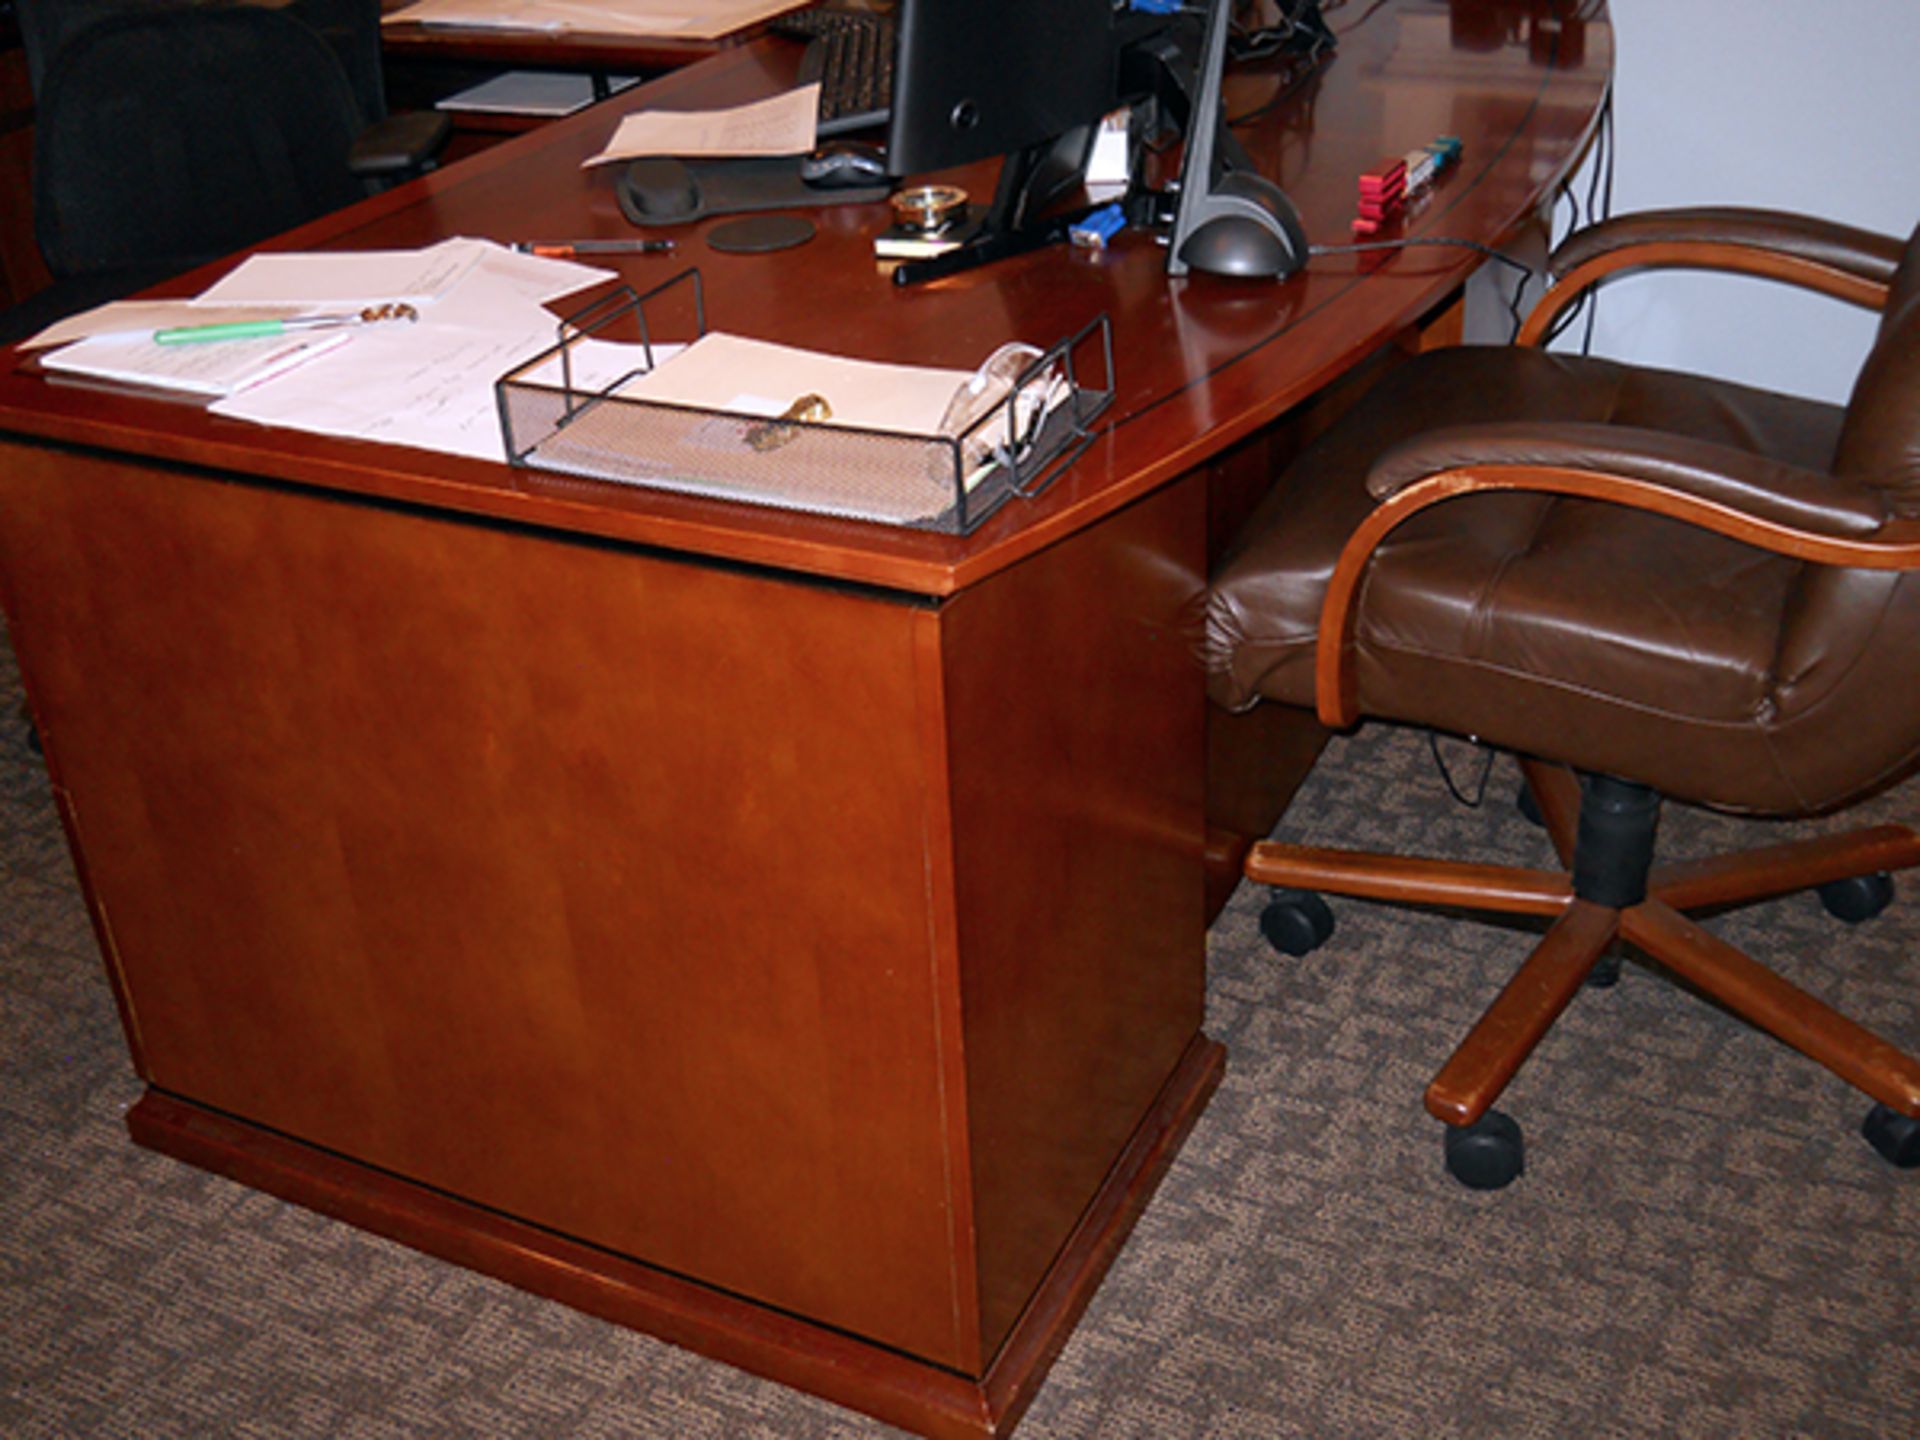 Executive Office, Desk, Chairs, Bookcase - Image 3 of 7